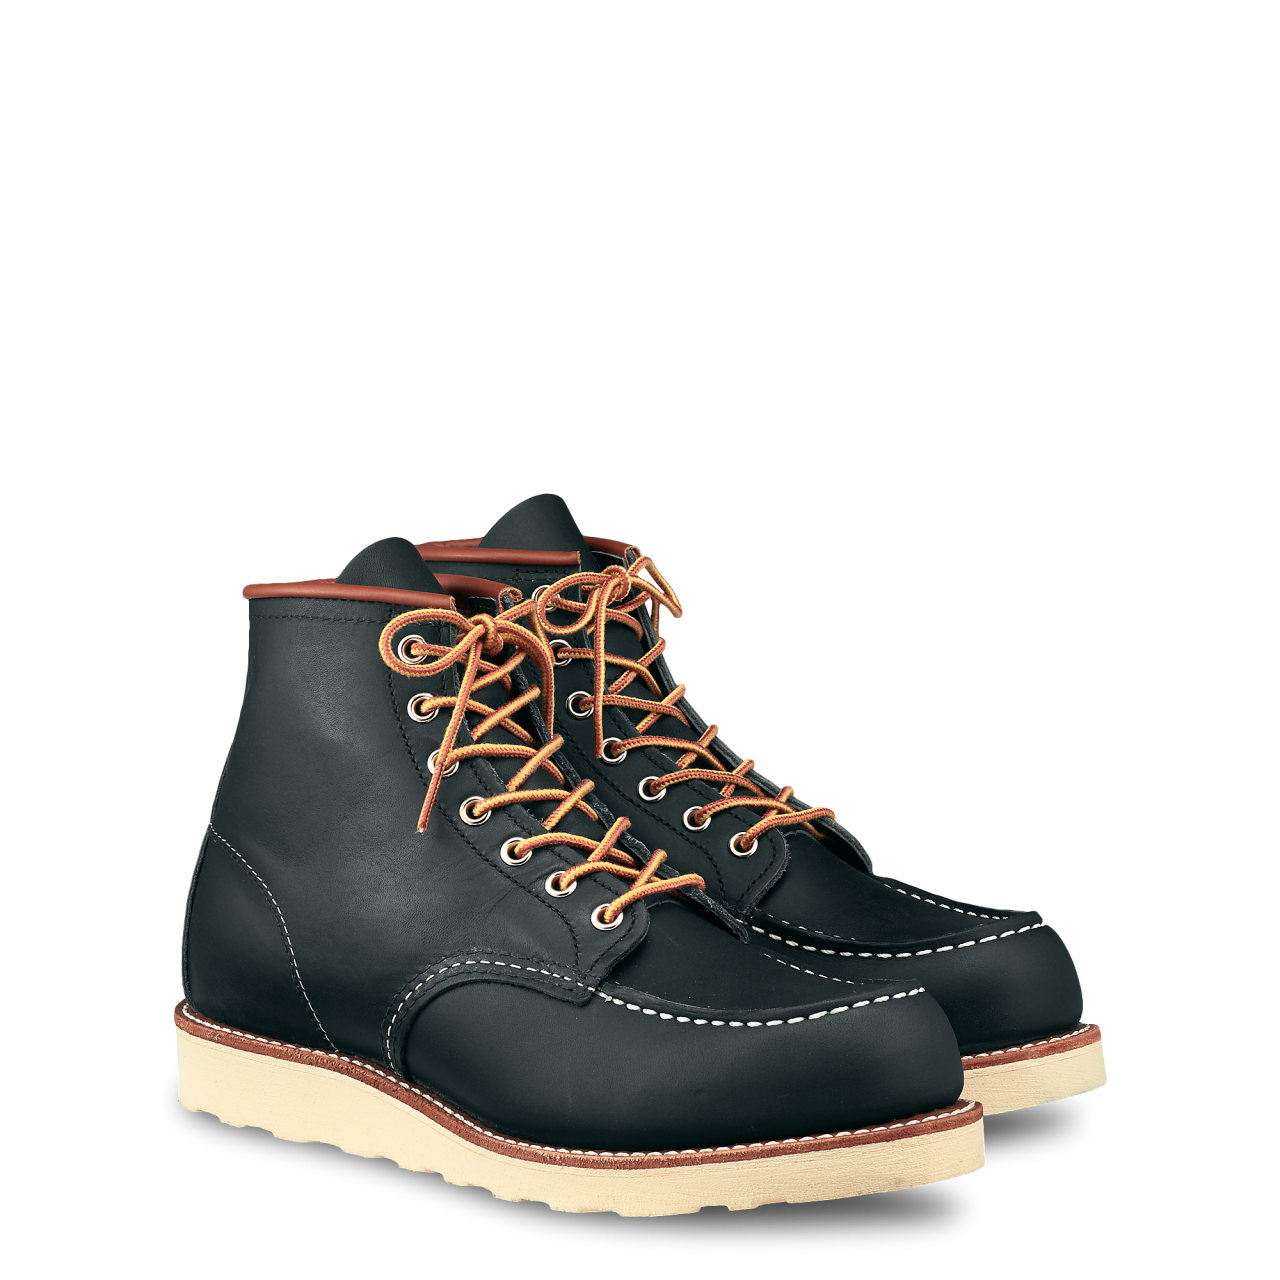 Red Wing 8859 Moc Toe